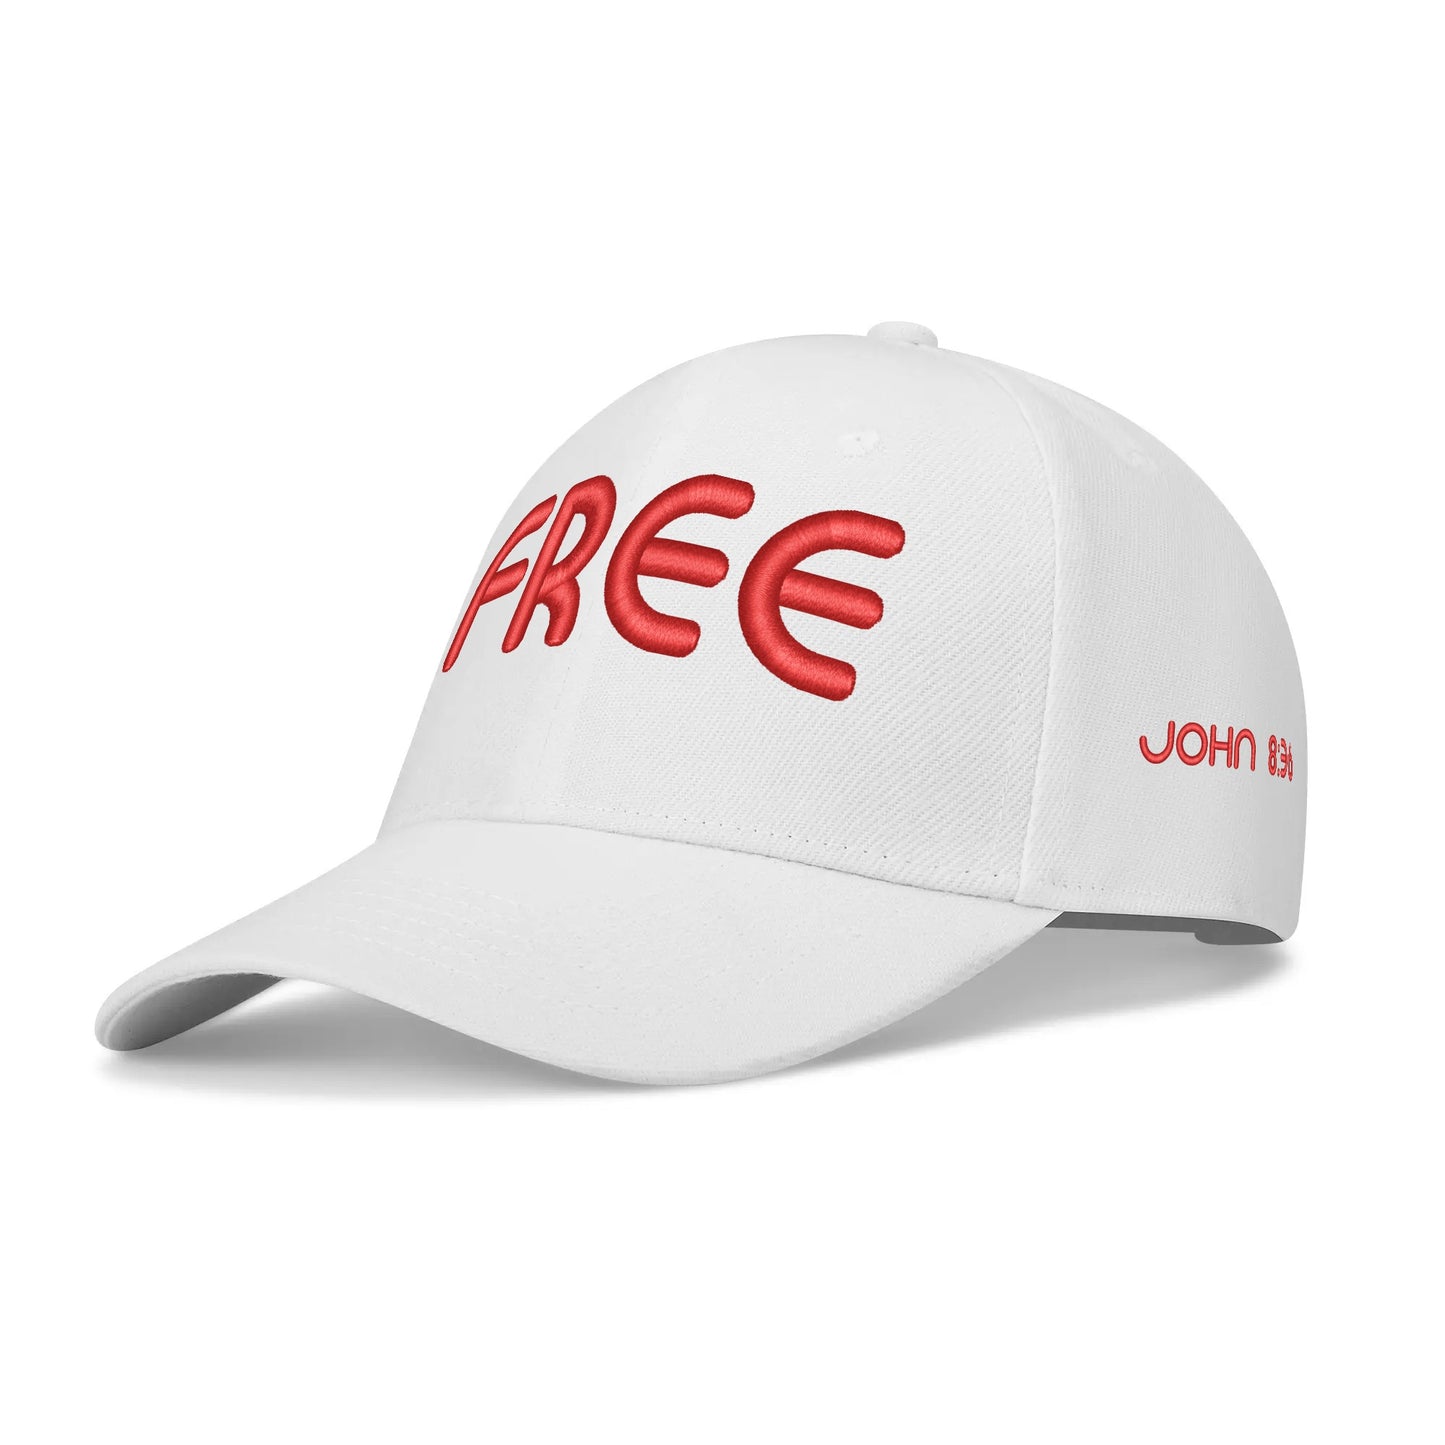 FREE INDEED- Four Sides Embroidered Adjustable Flat Baseball Cap, FREE SHIPPING